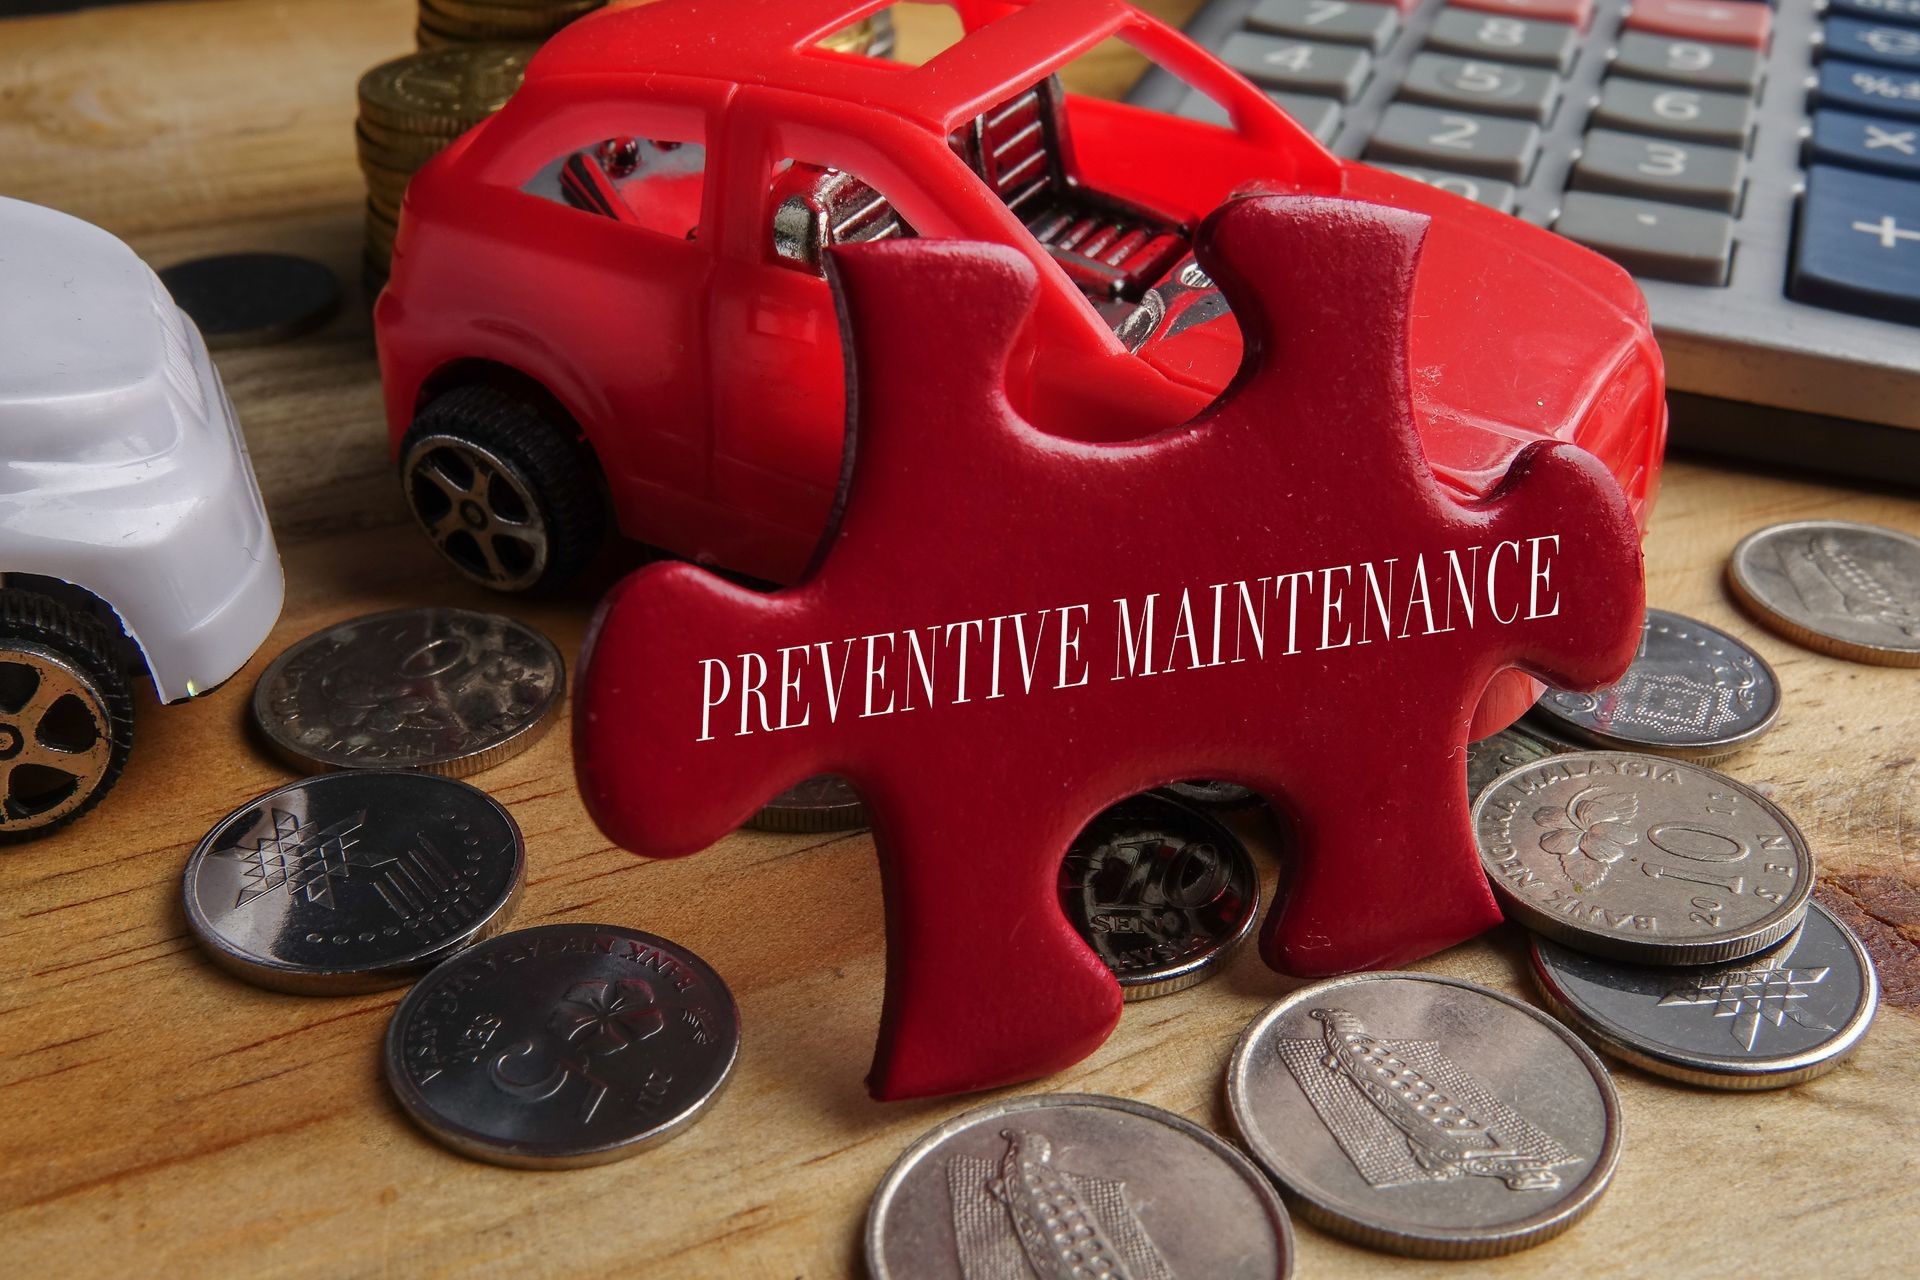 PREVENTIVE MAINTENANCE CONCEPT: Concept of repair, maintenance and servicing of machines. Model of red cabriolet with opened doors and hood and wrench on wooden surface